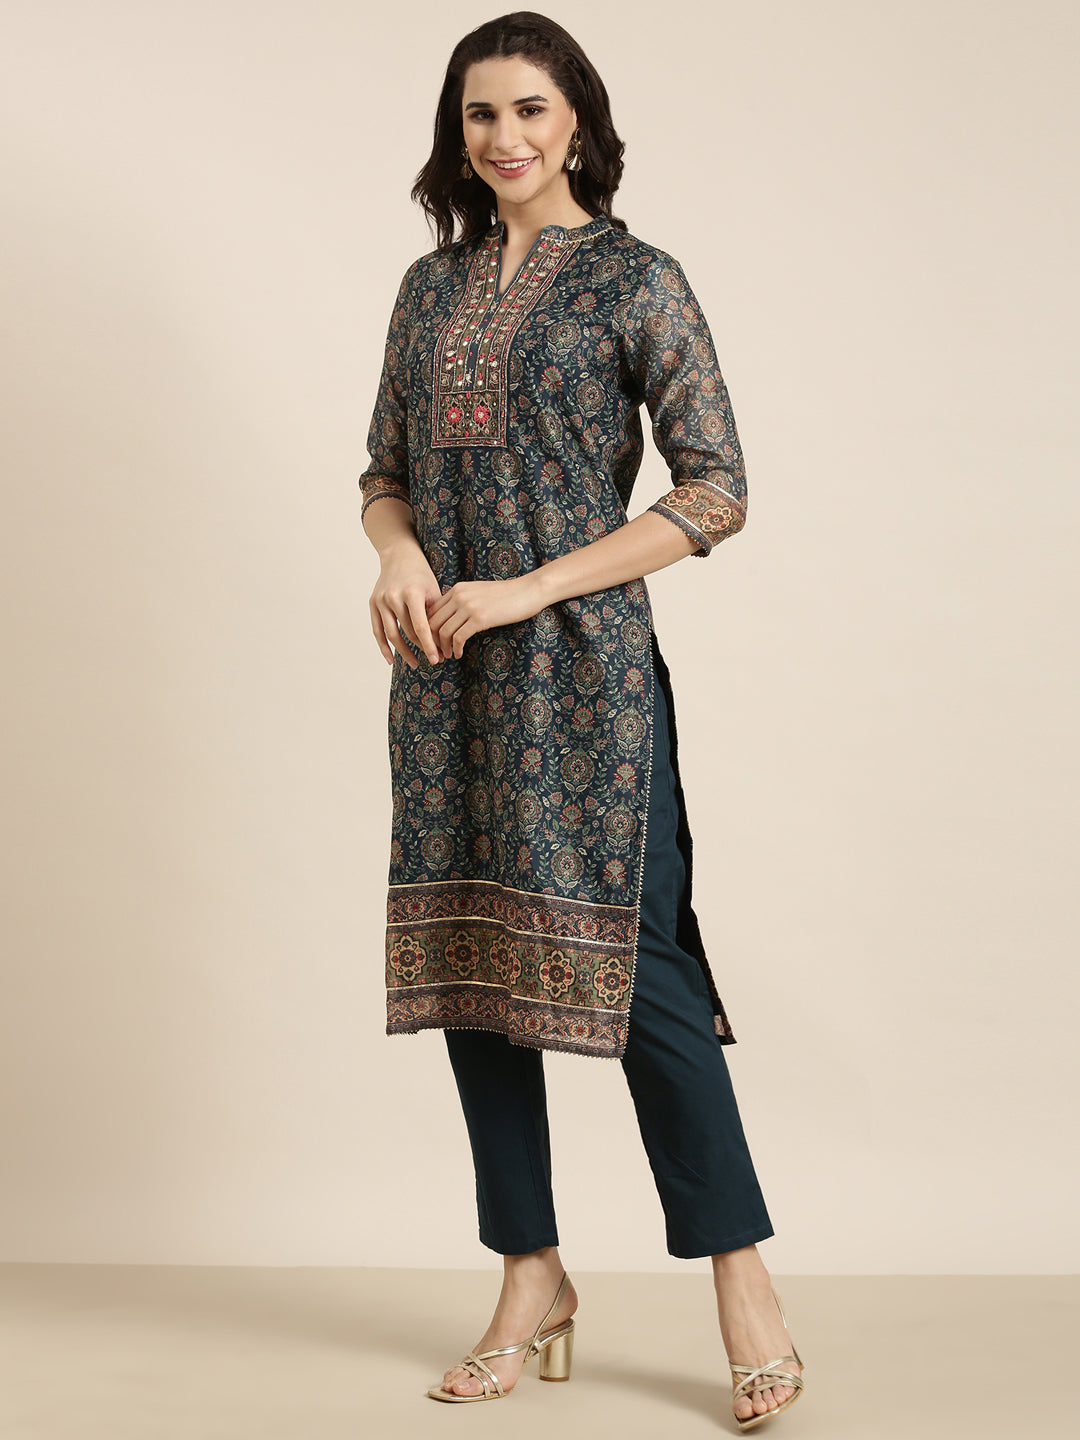 Women Straight Teal Ethnic Motifs Kurta and Trousers Set Comes With Dupatta